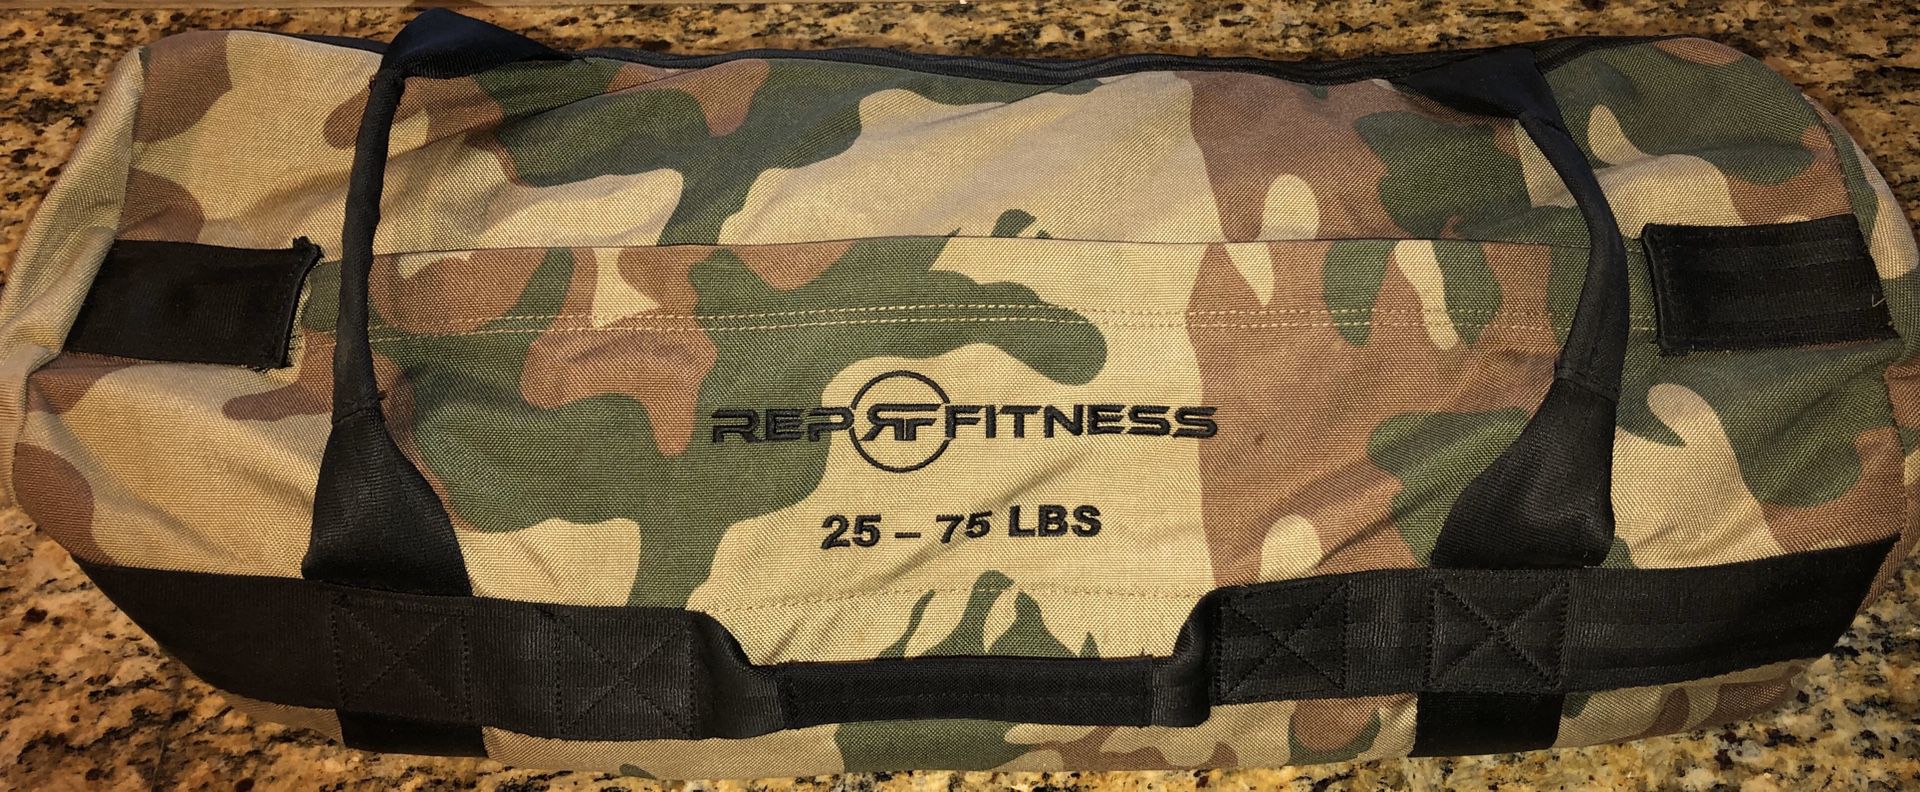 REP FITNESS Sandbag - Heavy Duty Workout Sandbag for Training, Cross-Training Workouts, Fitness, Exercise and Military Conditioning